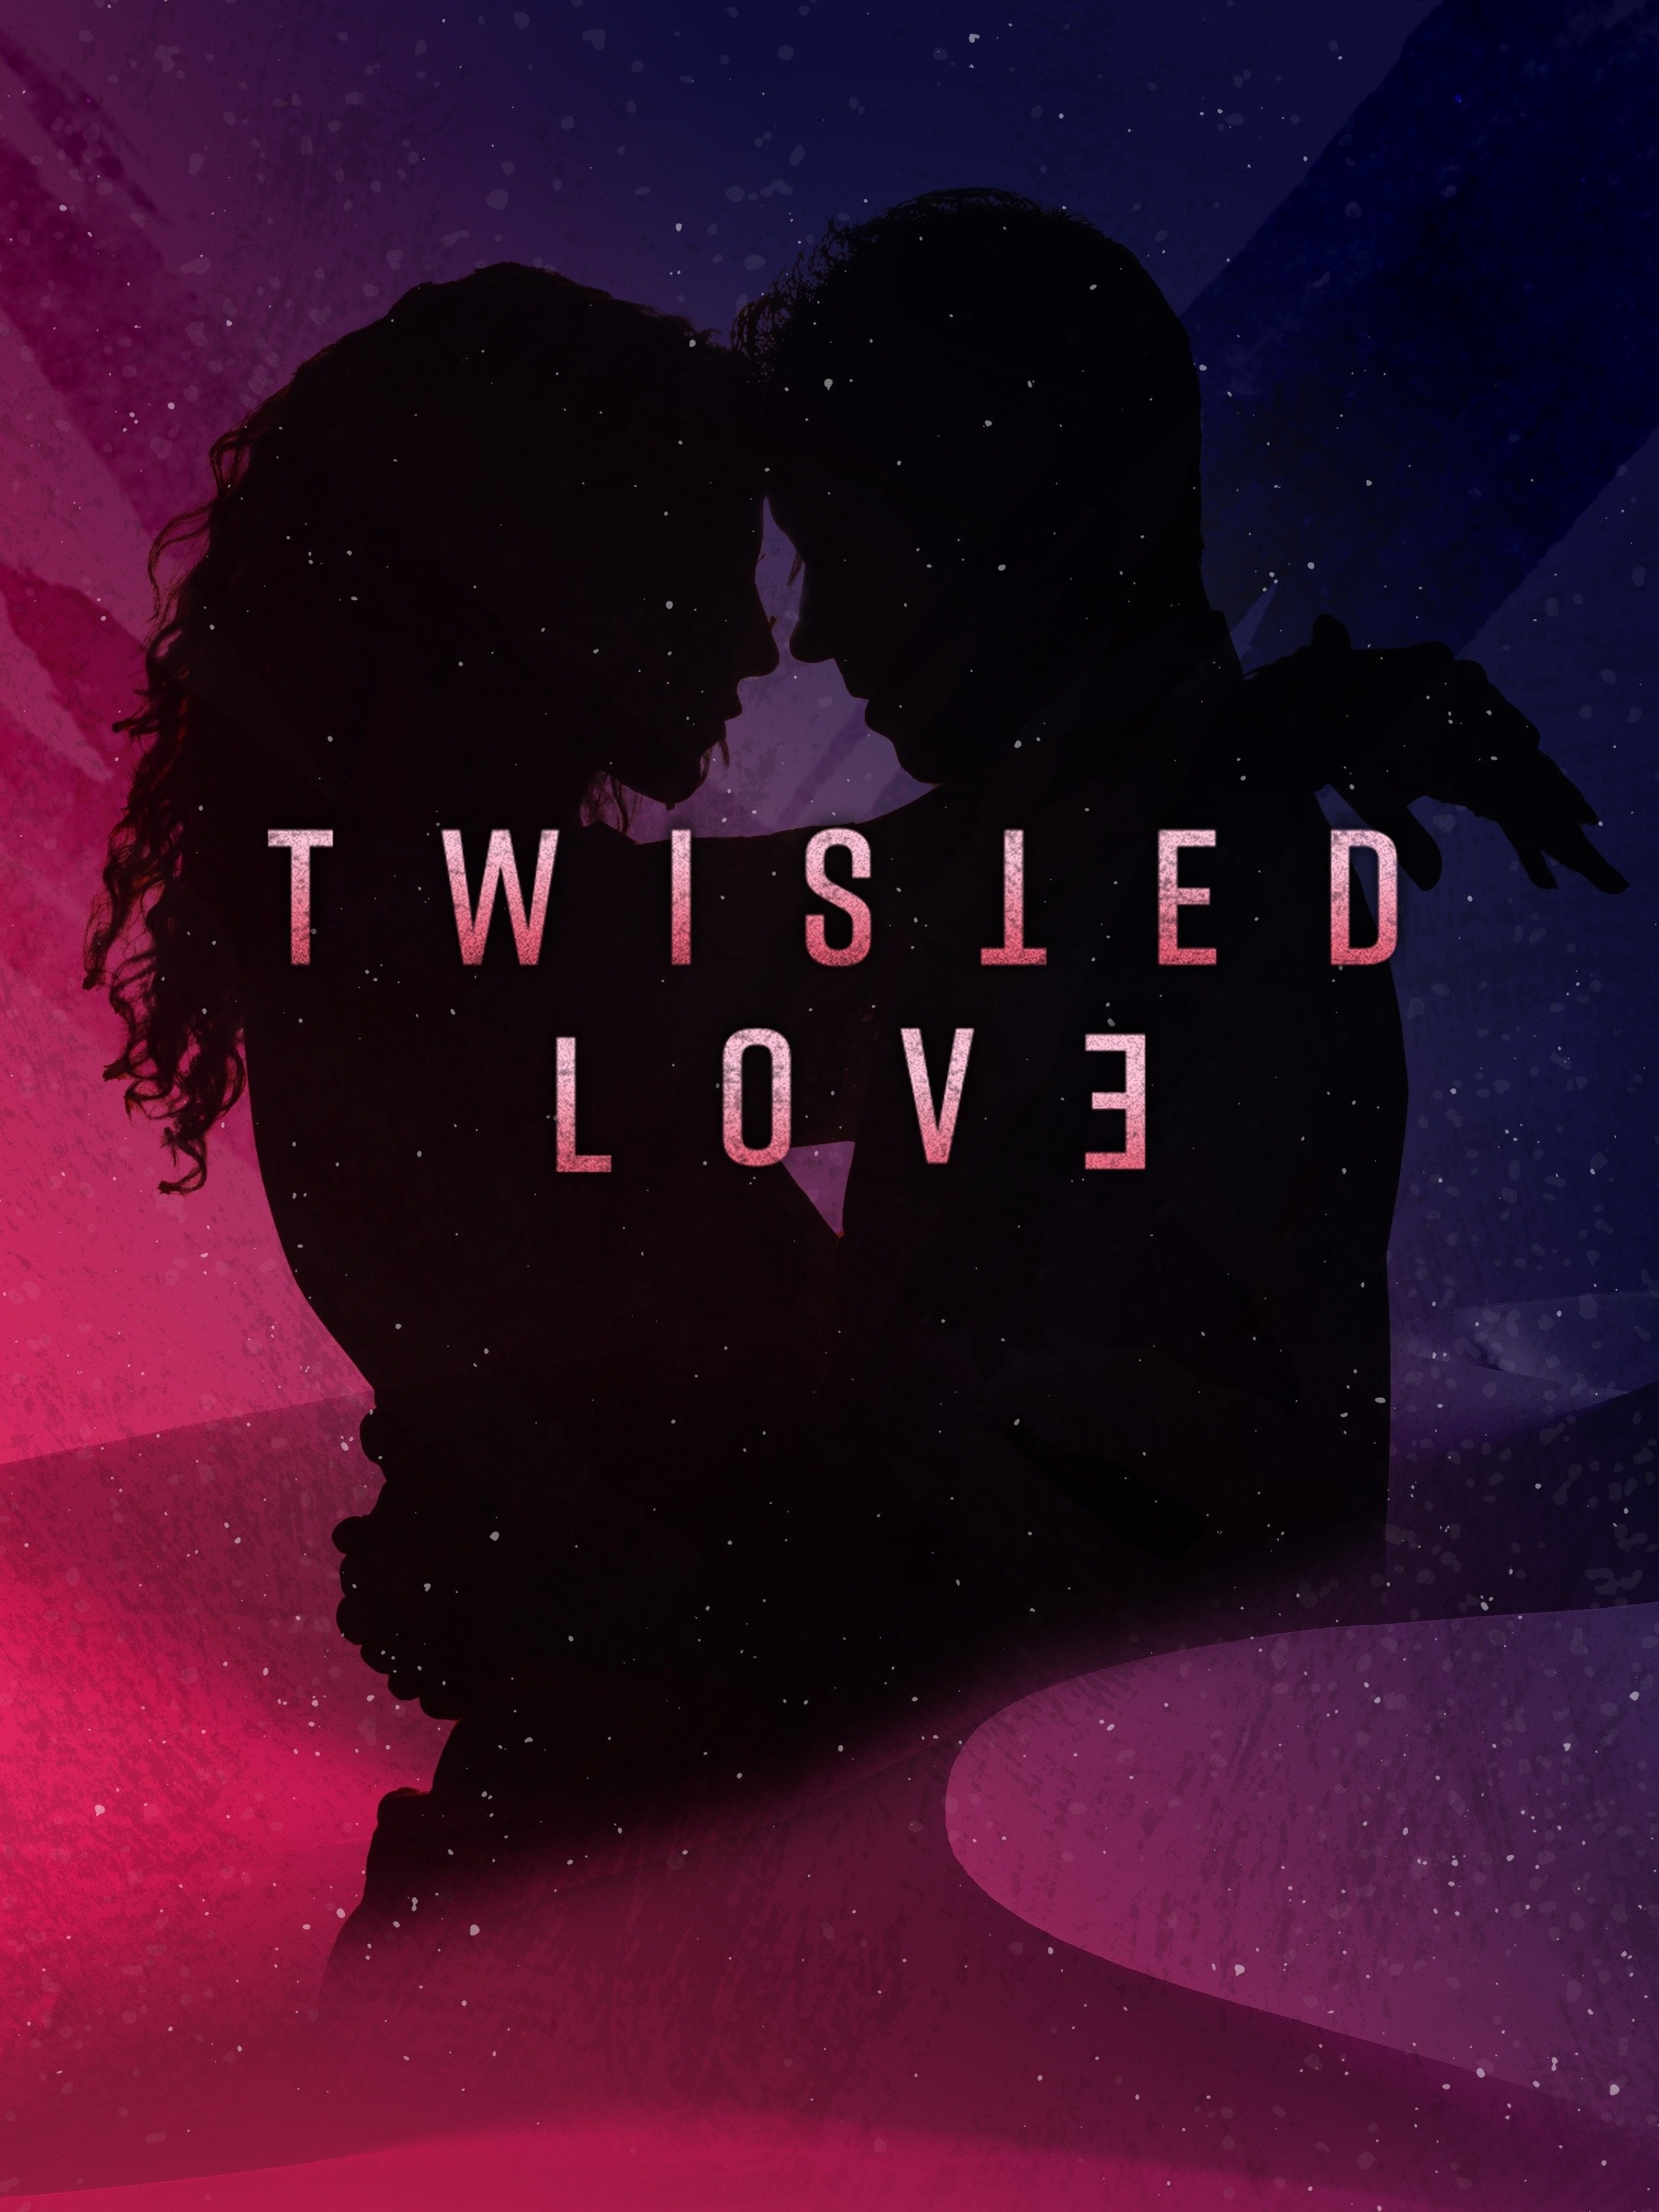 Twisted 1. Twisted love